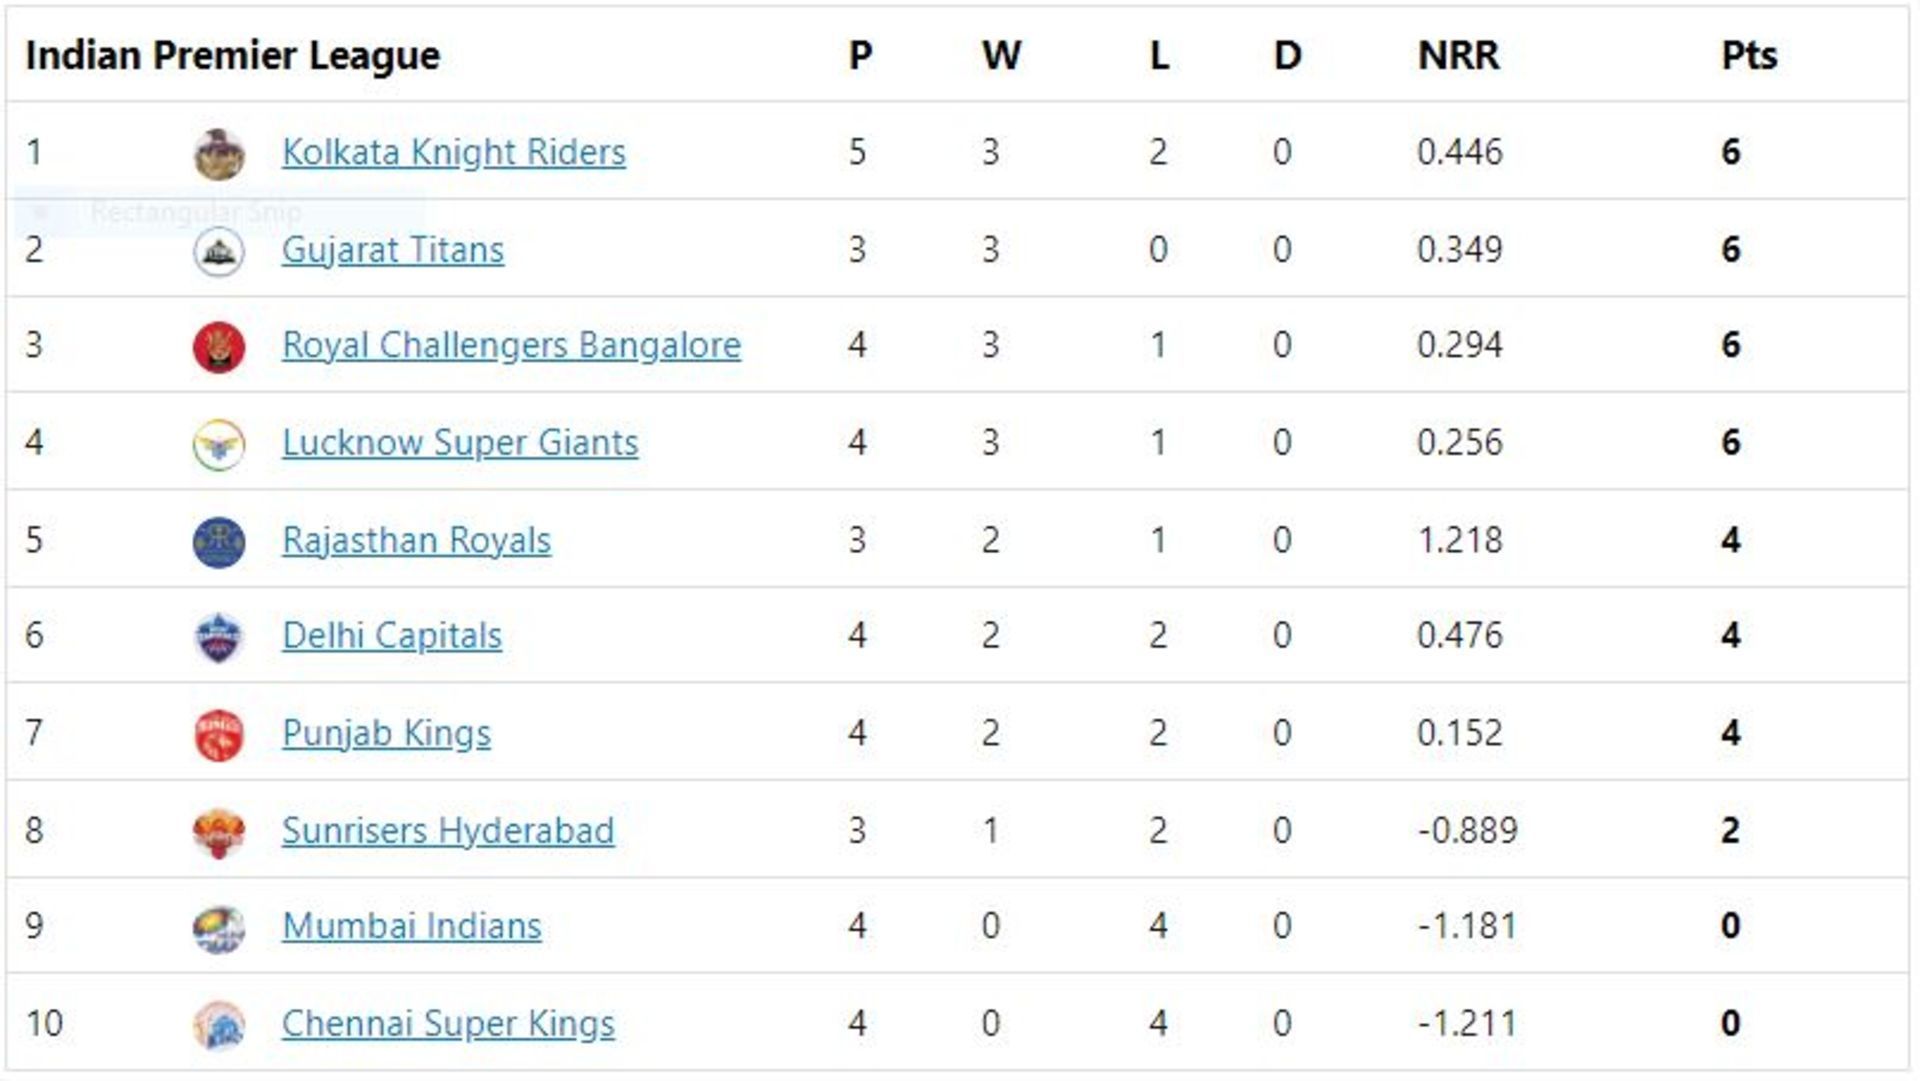 KKR remains at the top of the table for now despite the loss